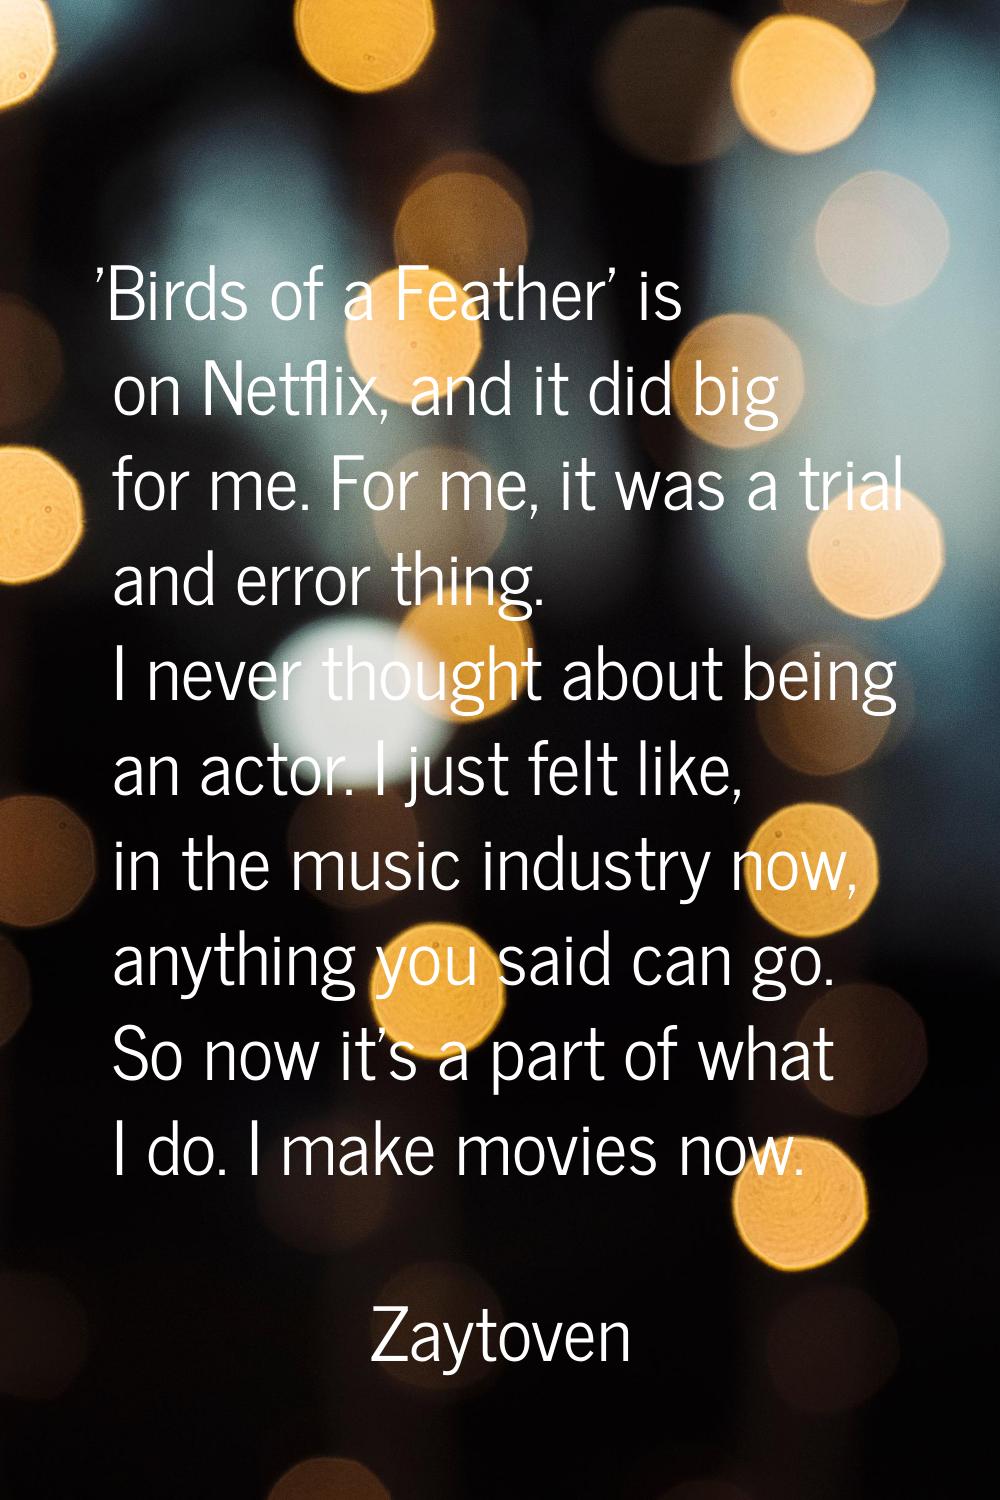 'Birds of a Feather' is on Netflix, and it did big for me. For me, it was a trial and error thing. 